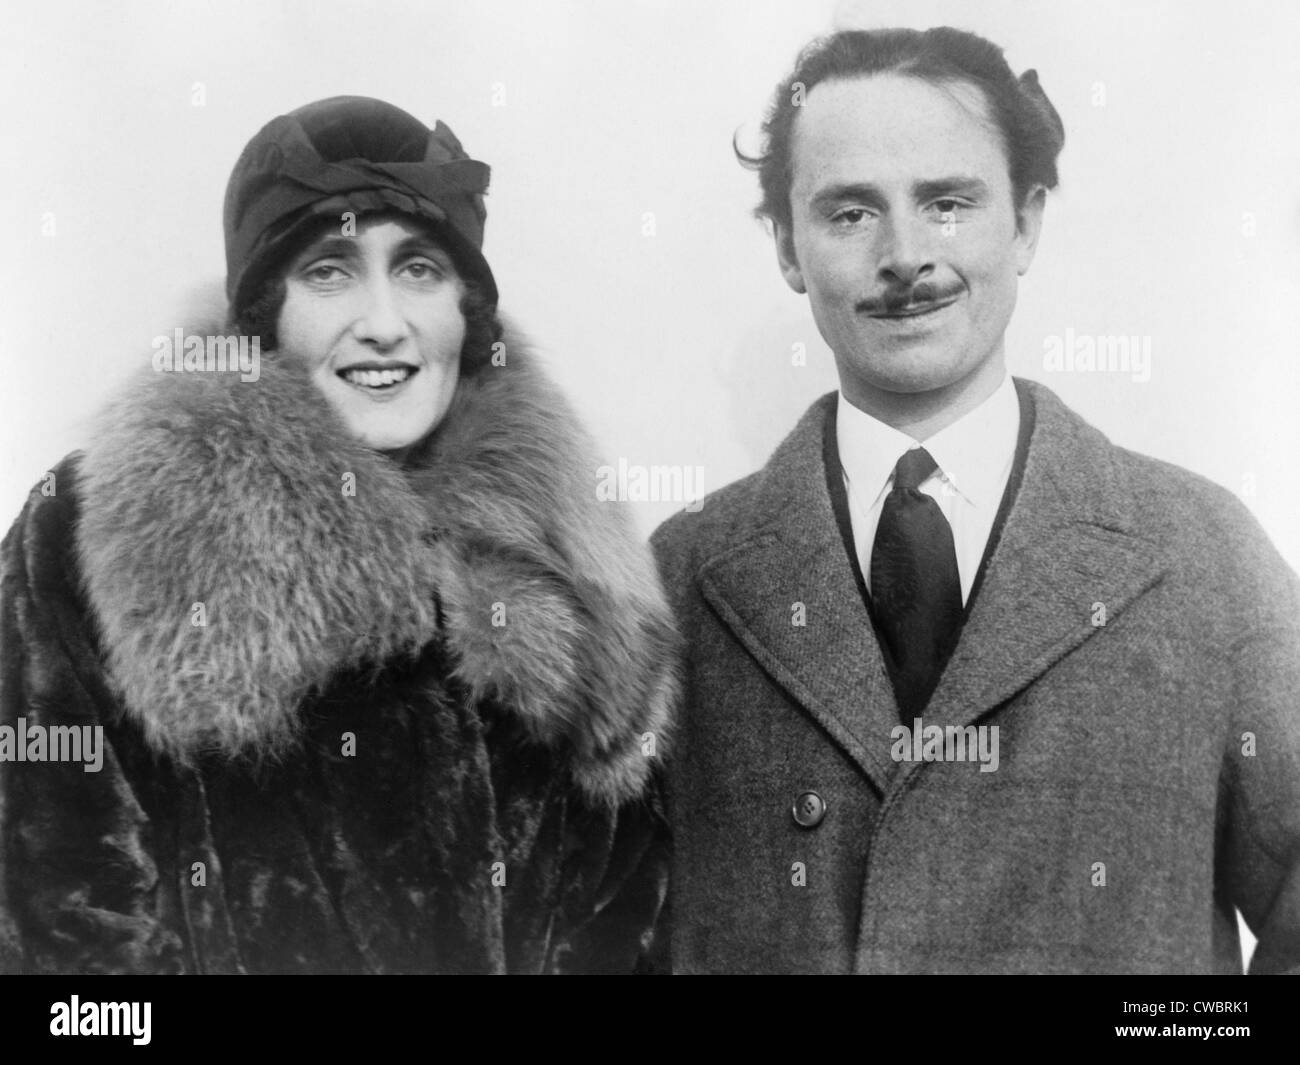 Sir Oswald Mosley (1896-1980), with his first wife, the former married Lady Cynthia Curzon. Mosley founded the British Union of Stock Photo